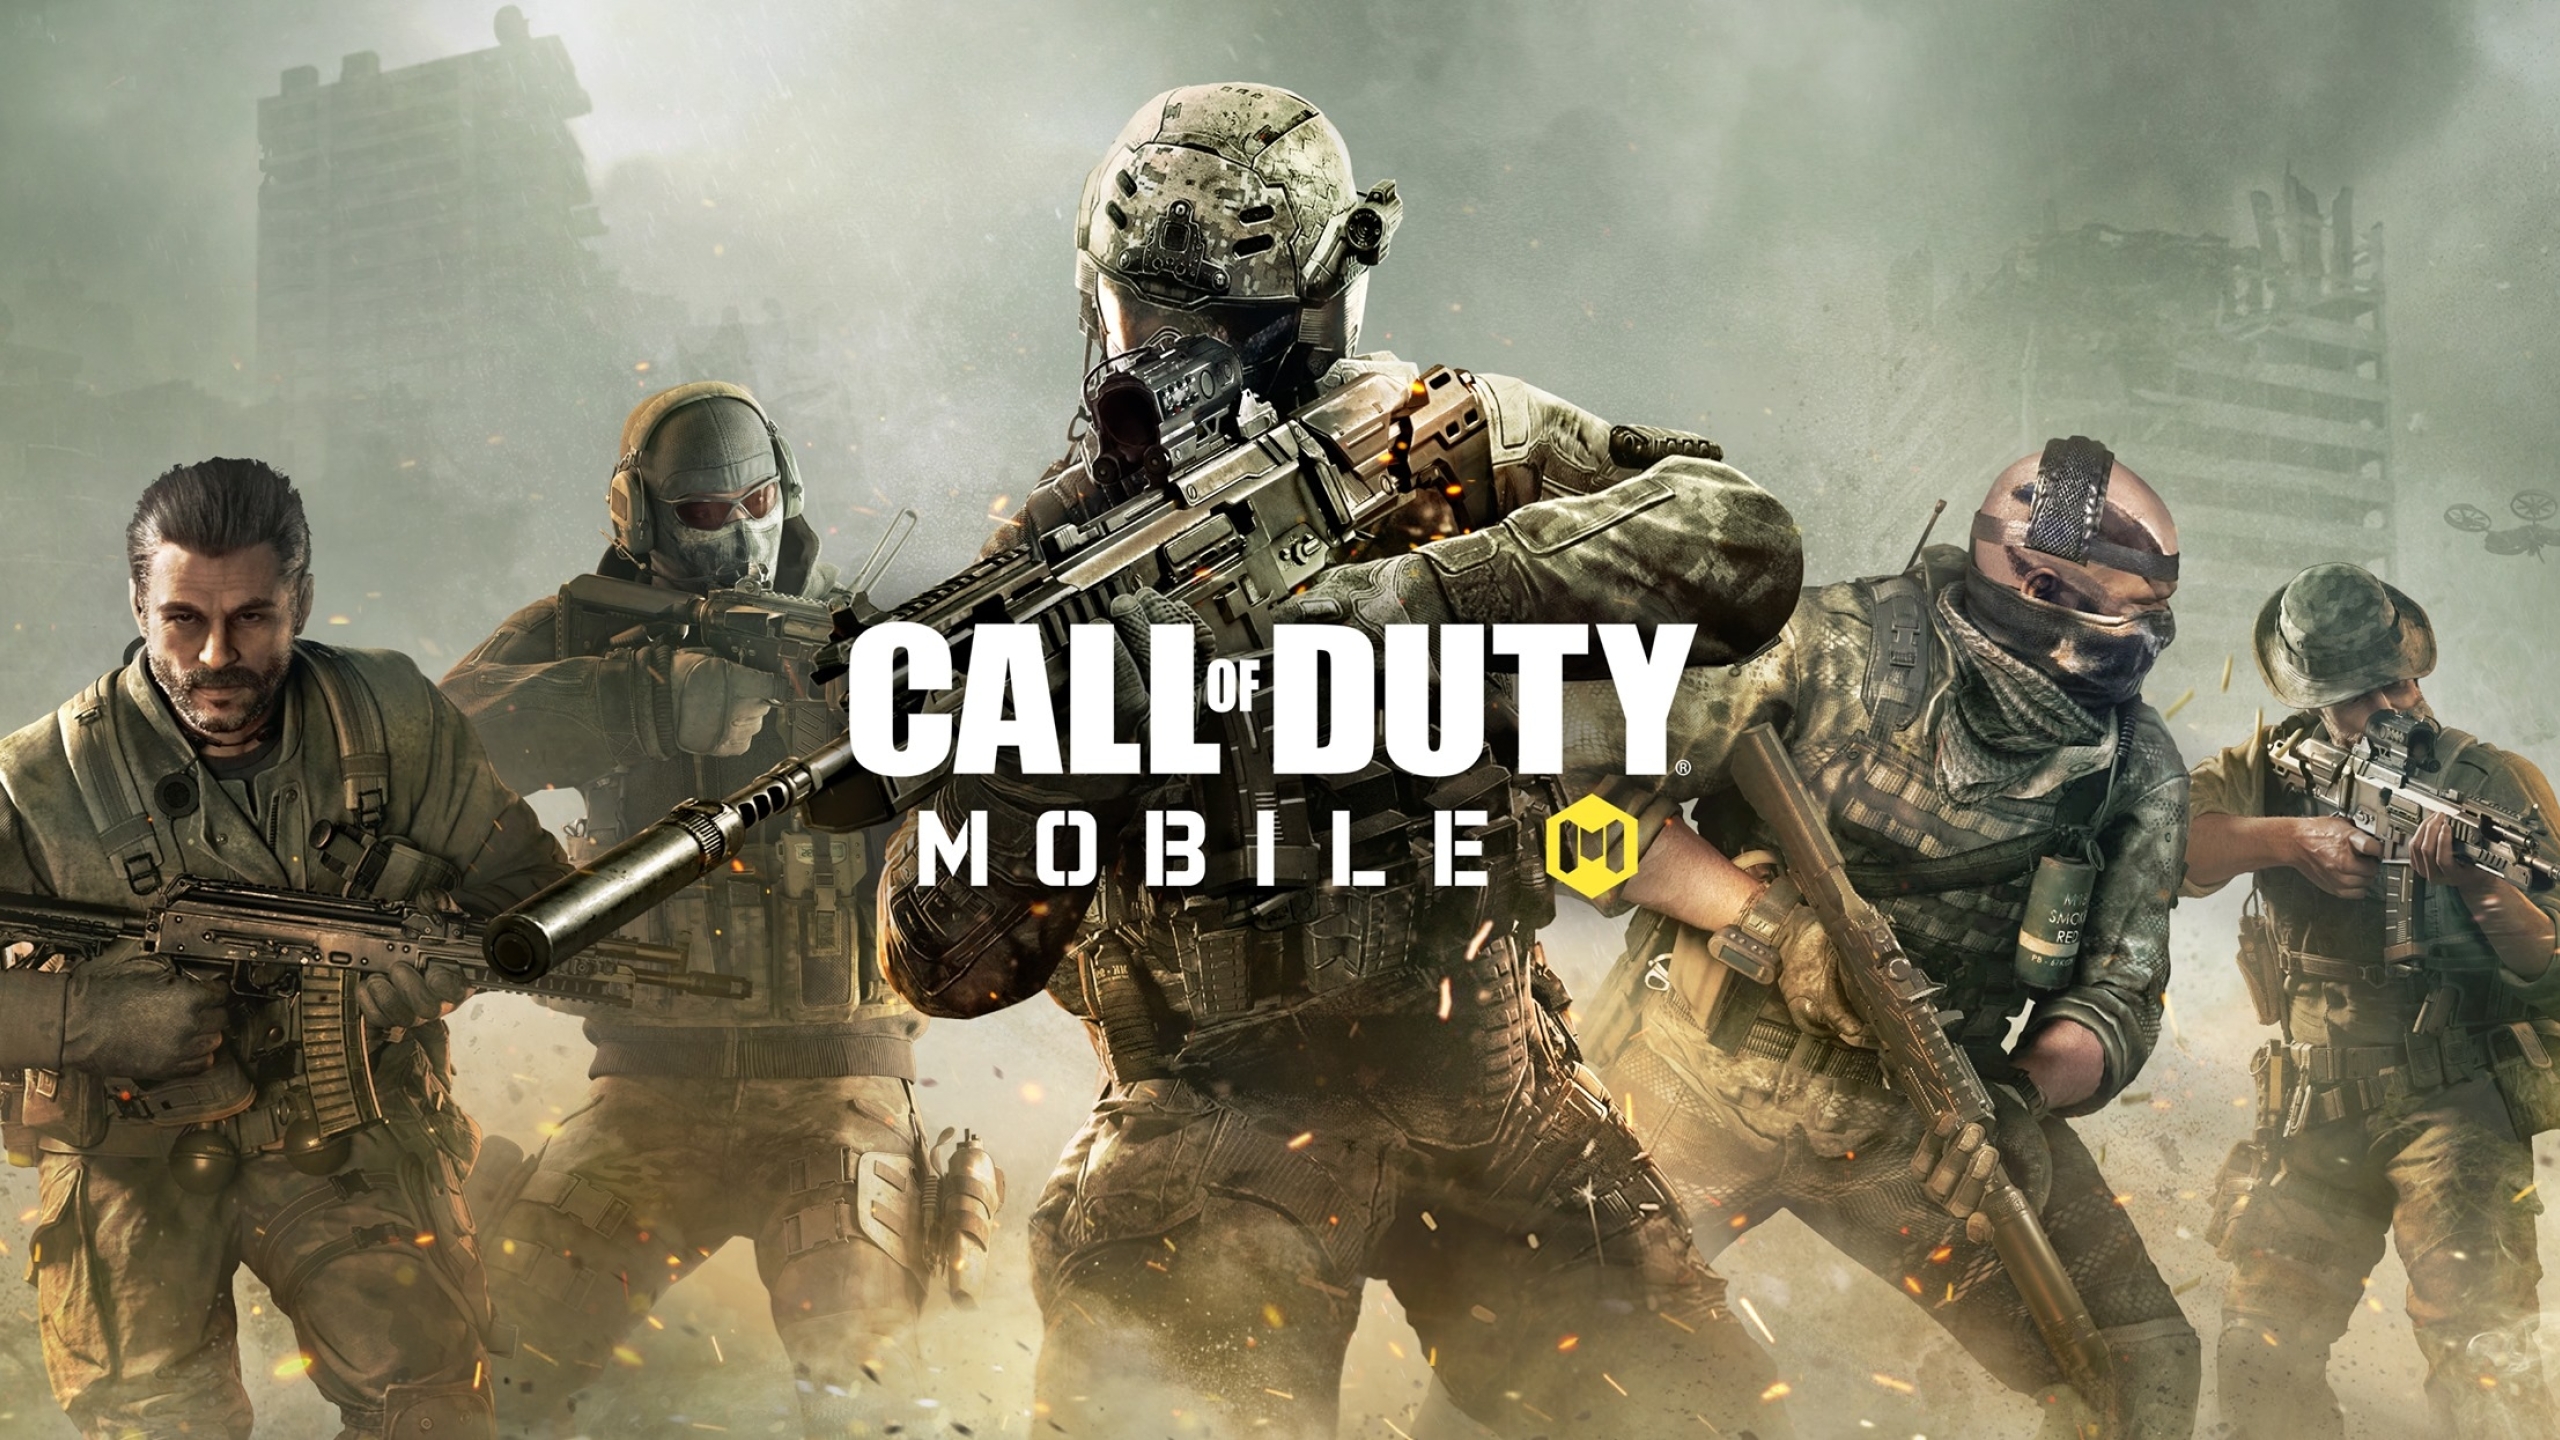 Of Duty Mobile Game 1440P Resolution